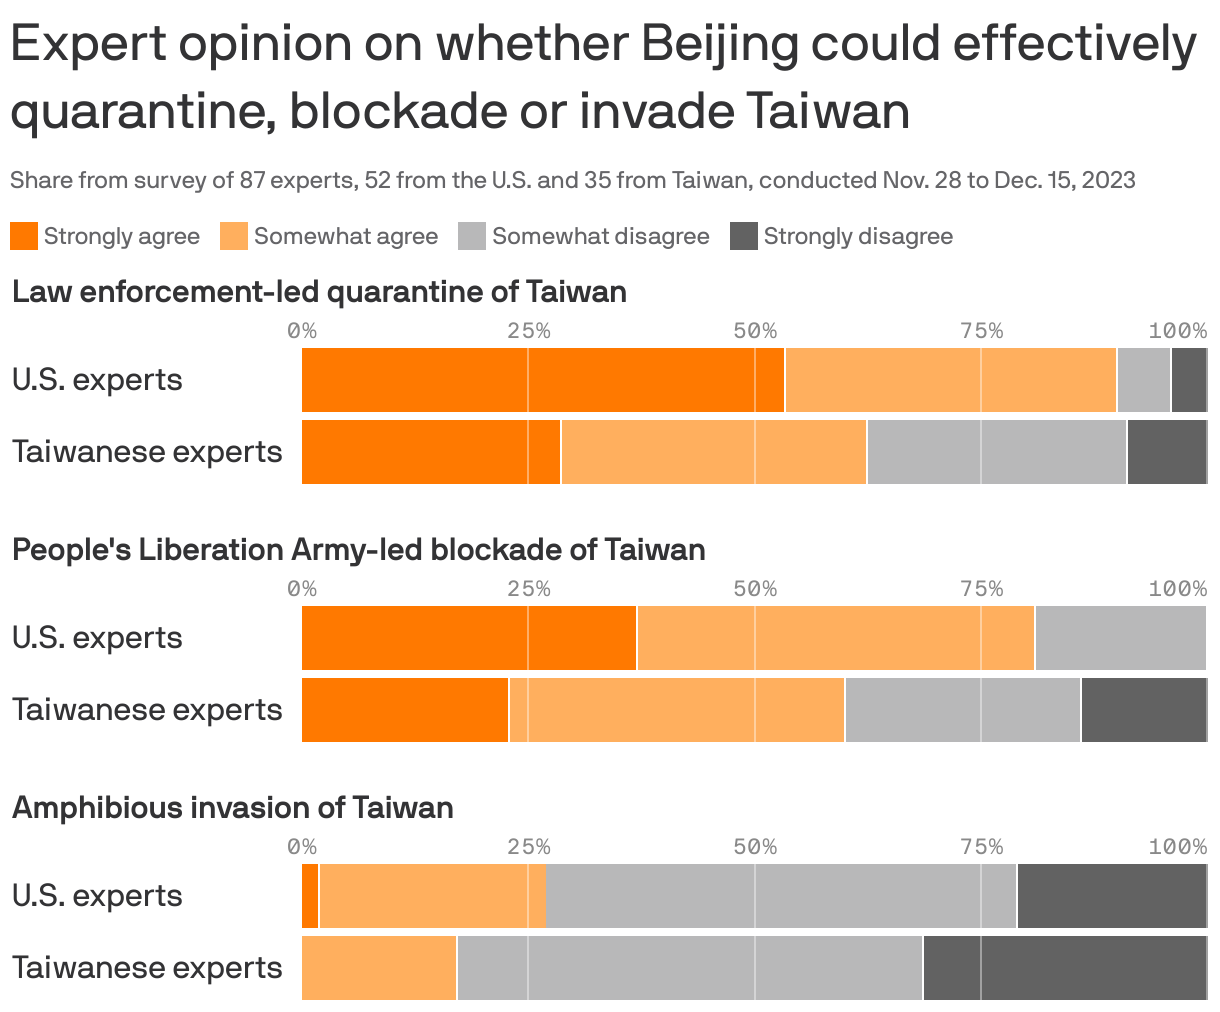 Expert opinion on whether Beijing could effectively quarantine, blockade or invade Taiwan